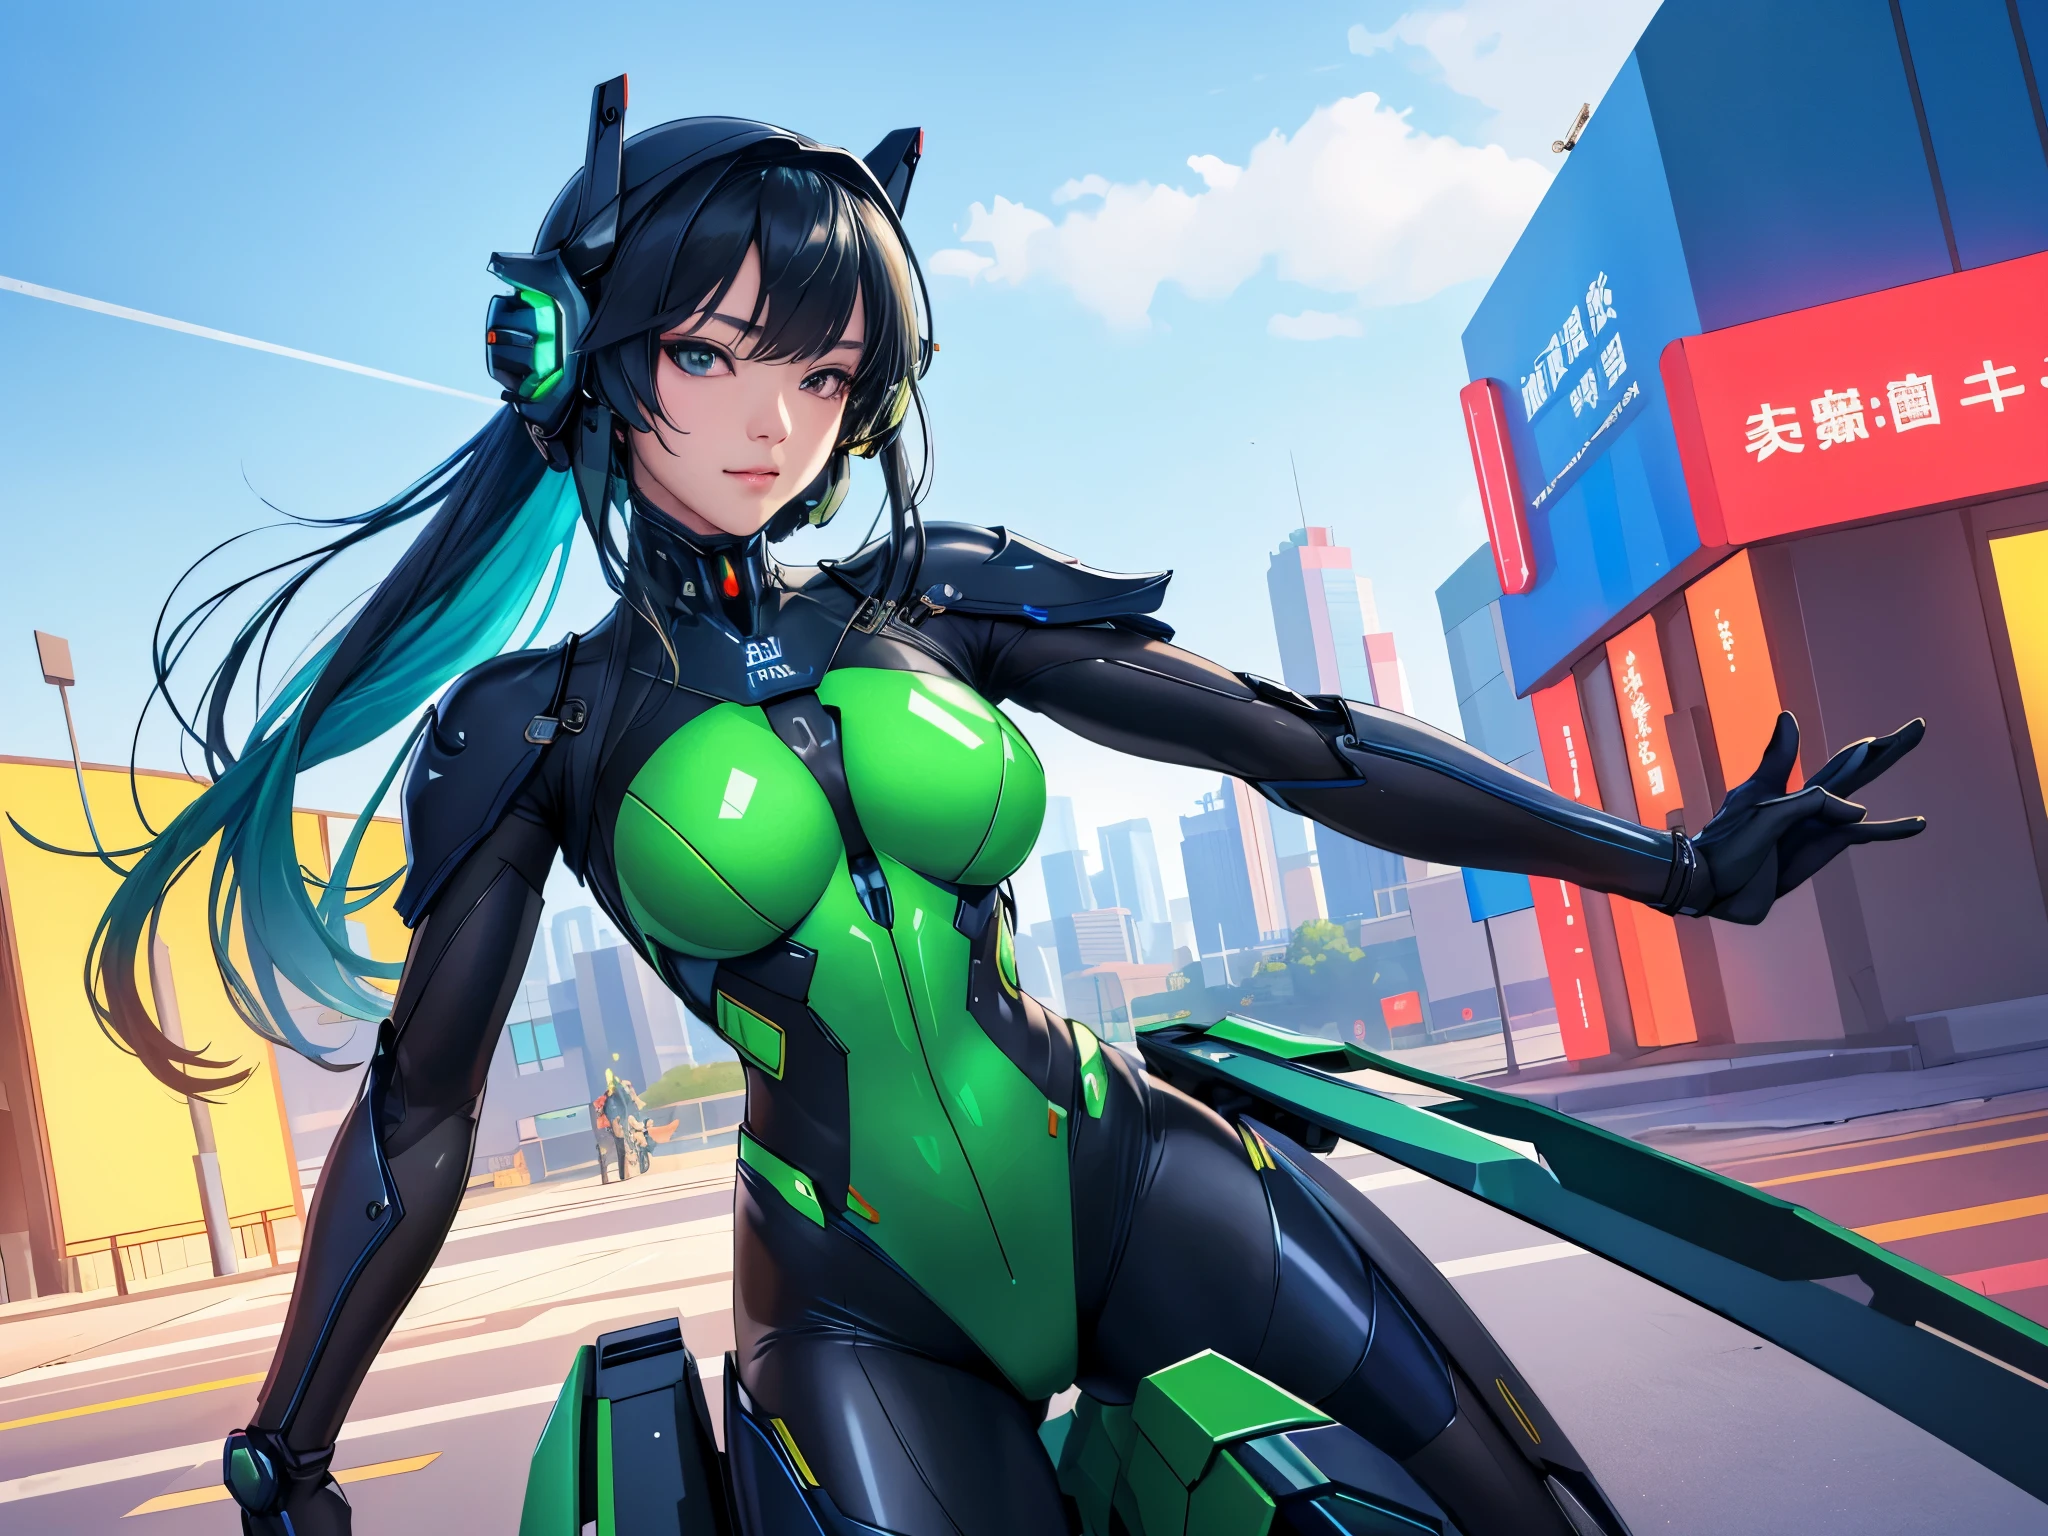 Highest image quality, excellent detail, Ultra-high resolution, (Realistic: 1.4), The best illustrations, Offer details, Highly concentrated 1girl, Has a delicate and beautiful face, Dressed in black and green mechs, wearing a mech helmet, holding direction, riding motorcycles, The background is a high-tech light scene of the future city. 超Realistic插画, 超Realistic渲染, clean digital render, photo realistic render, 超Realistic插画